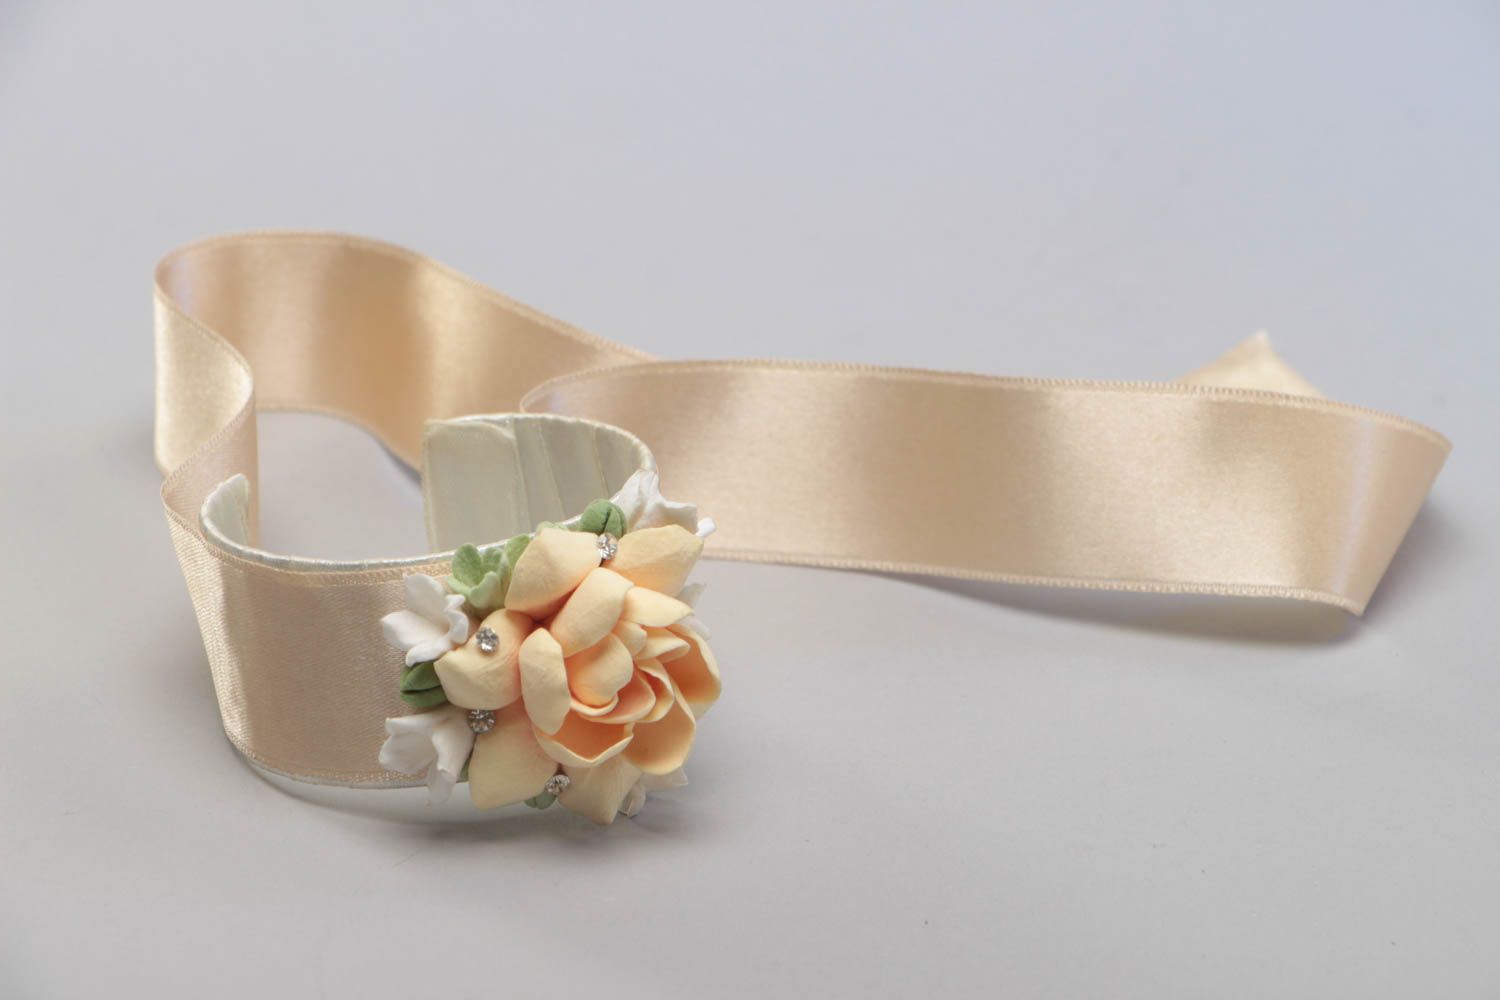 Bracelet made of polymer clay and satin ribbon handmade tender accessory photo 3